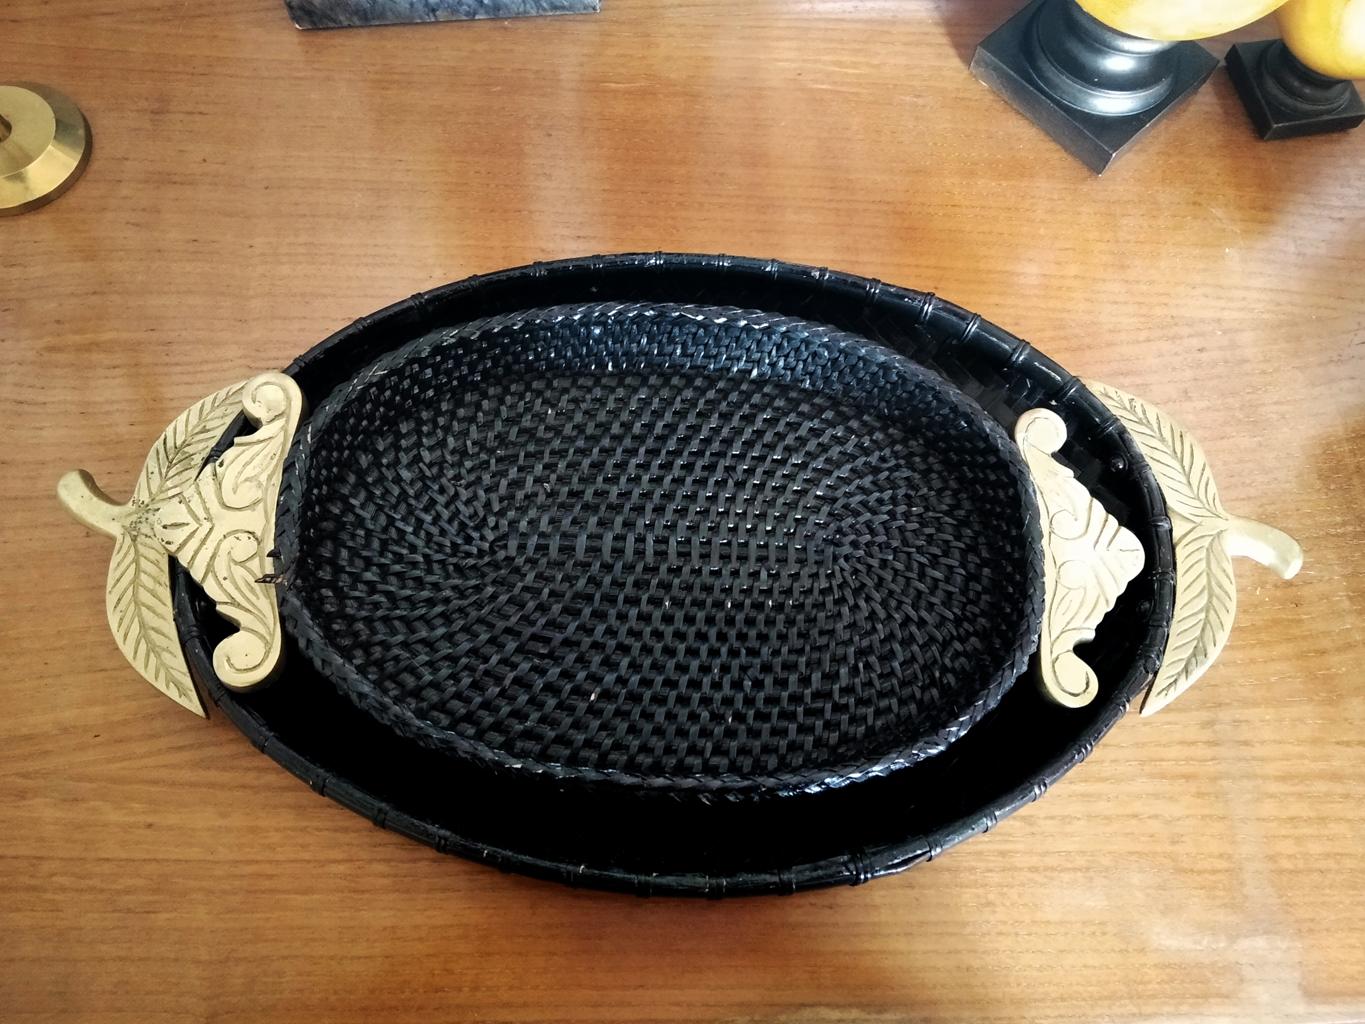 Trays Black Rattan and Brass Handles Oriental Origin 3 Pieces, Mid 20th Century For Sale 6